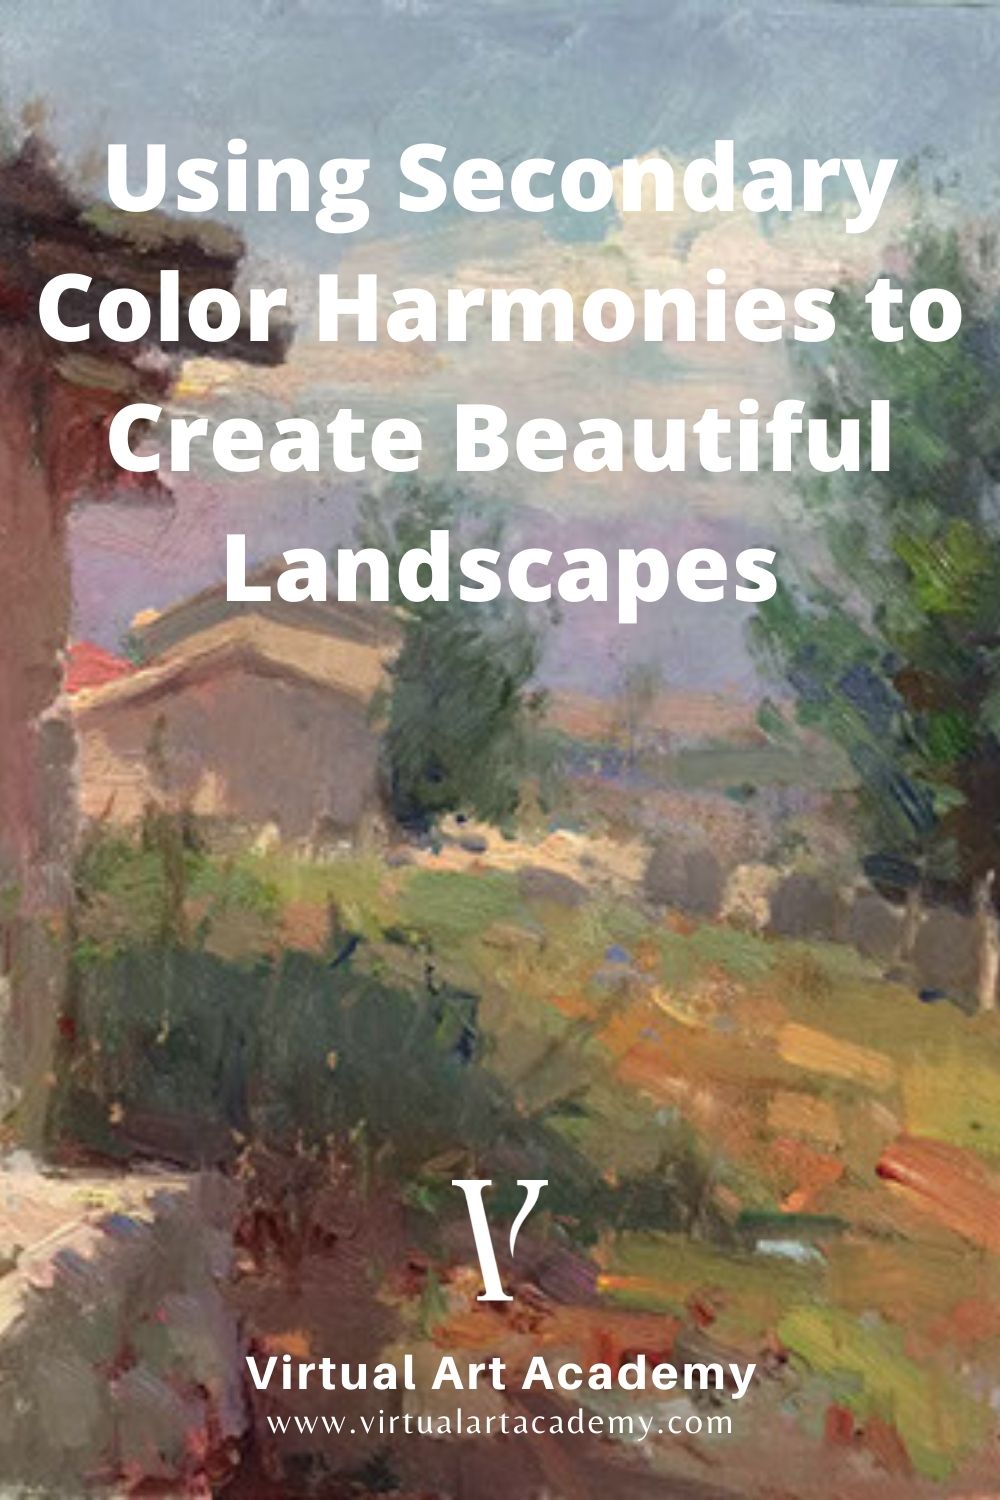 Using a Secondary Color Harmony to Create Beautiful Landscapes